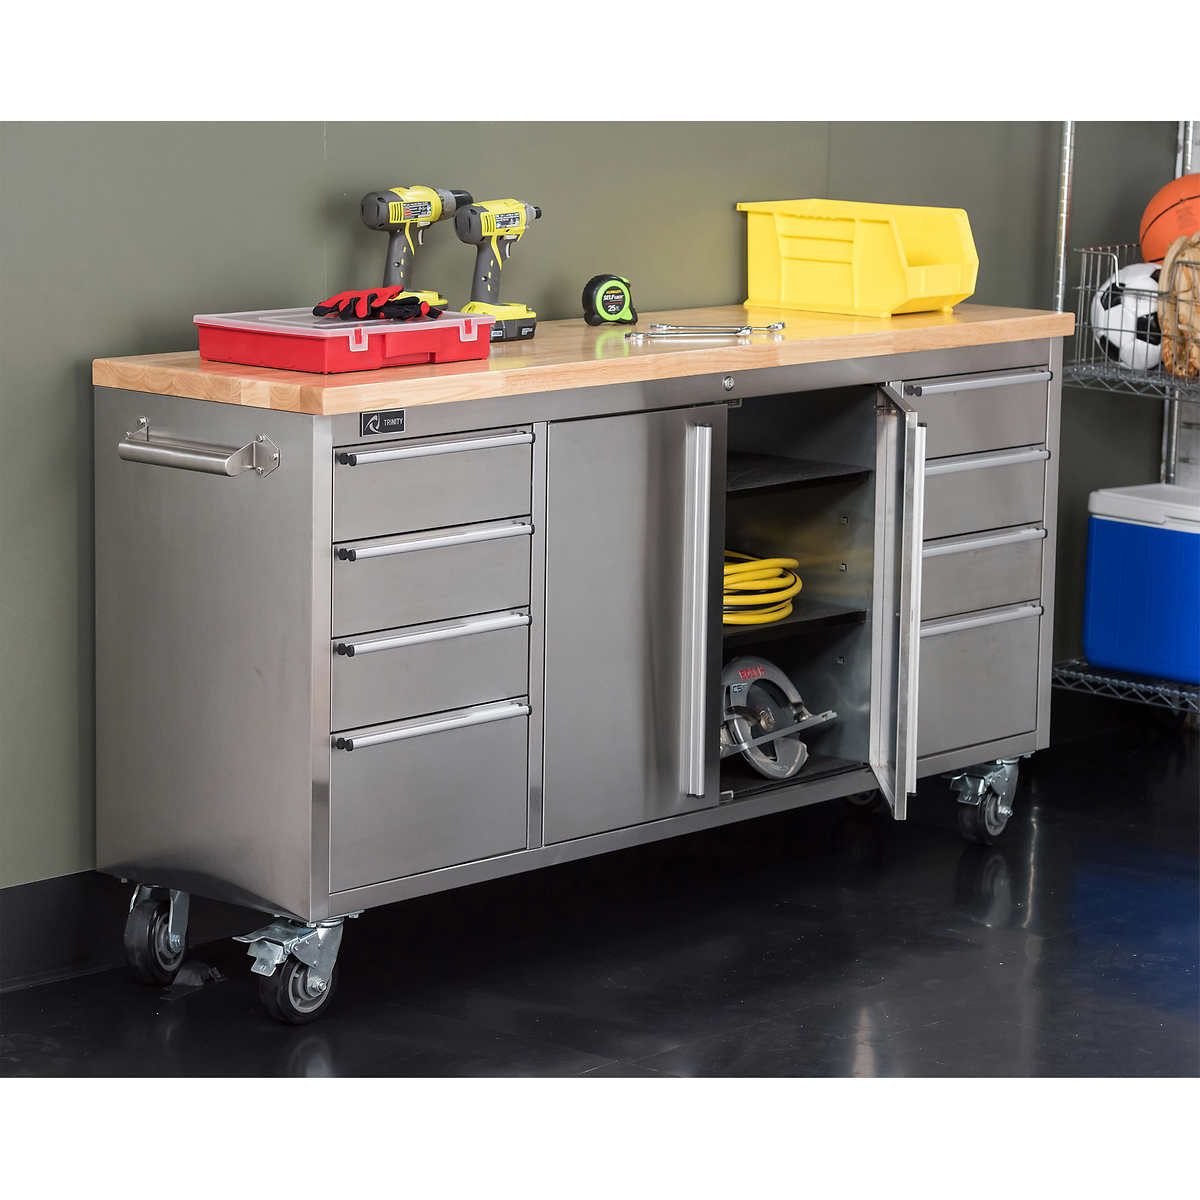 10 Workshop Storage Products You Can Get At Costco Family Handyman